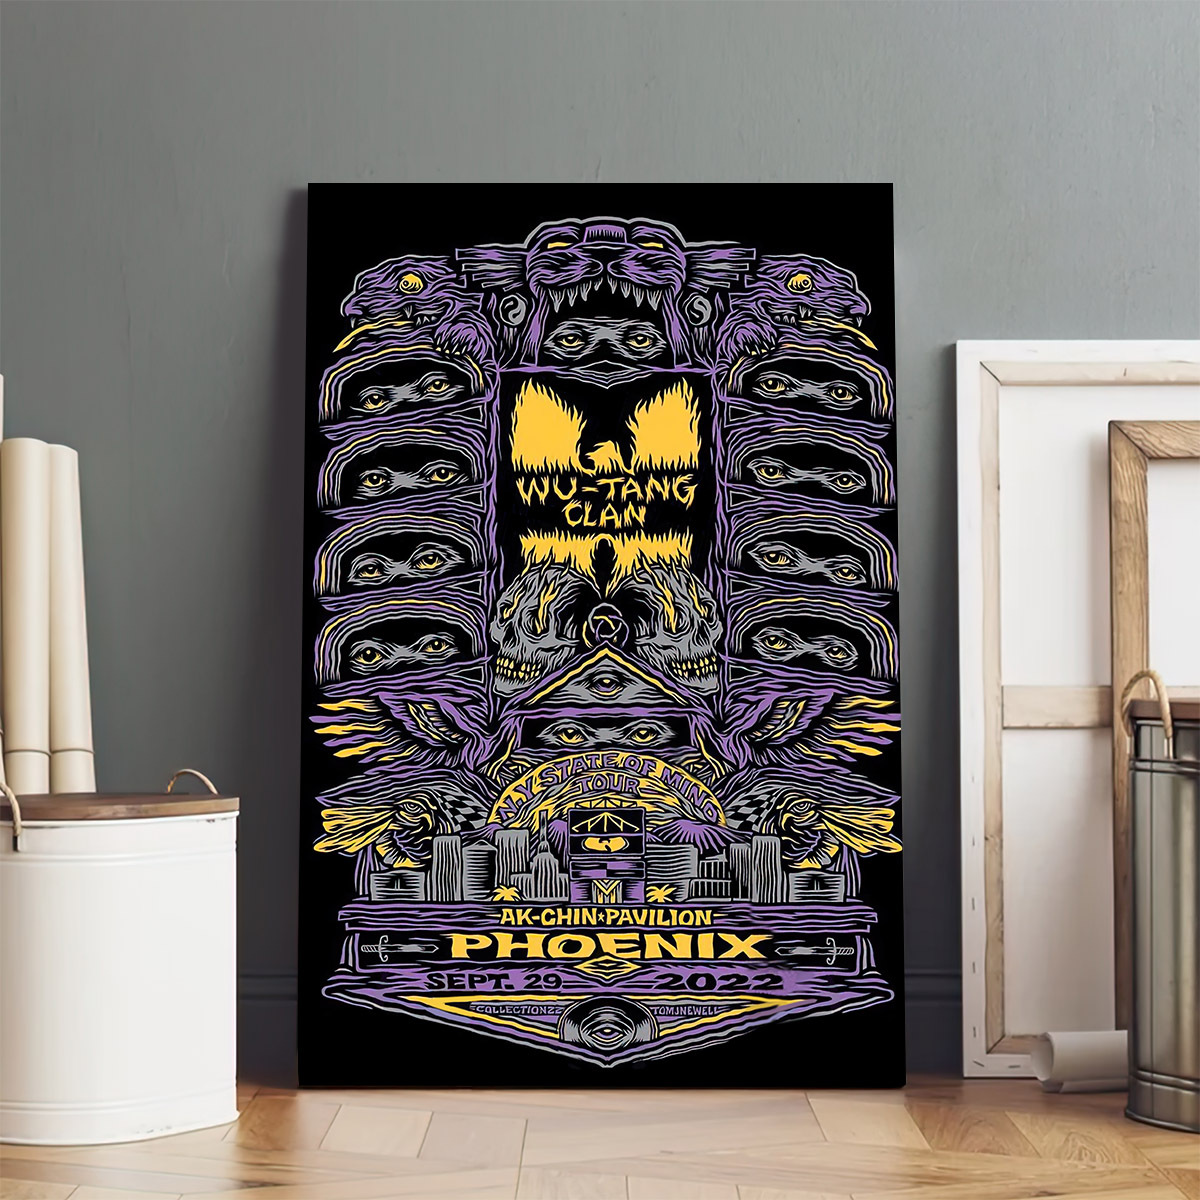 Wu-tang Clan New York State Of Mind Tour 2022 Ak-Chin Pavilion Poster Canvas